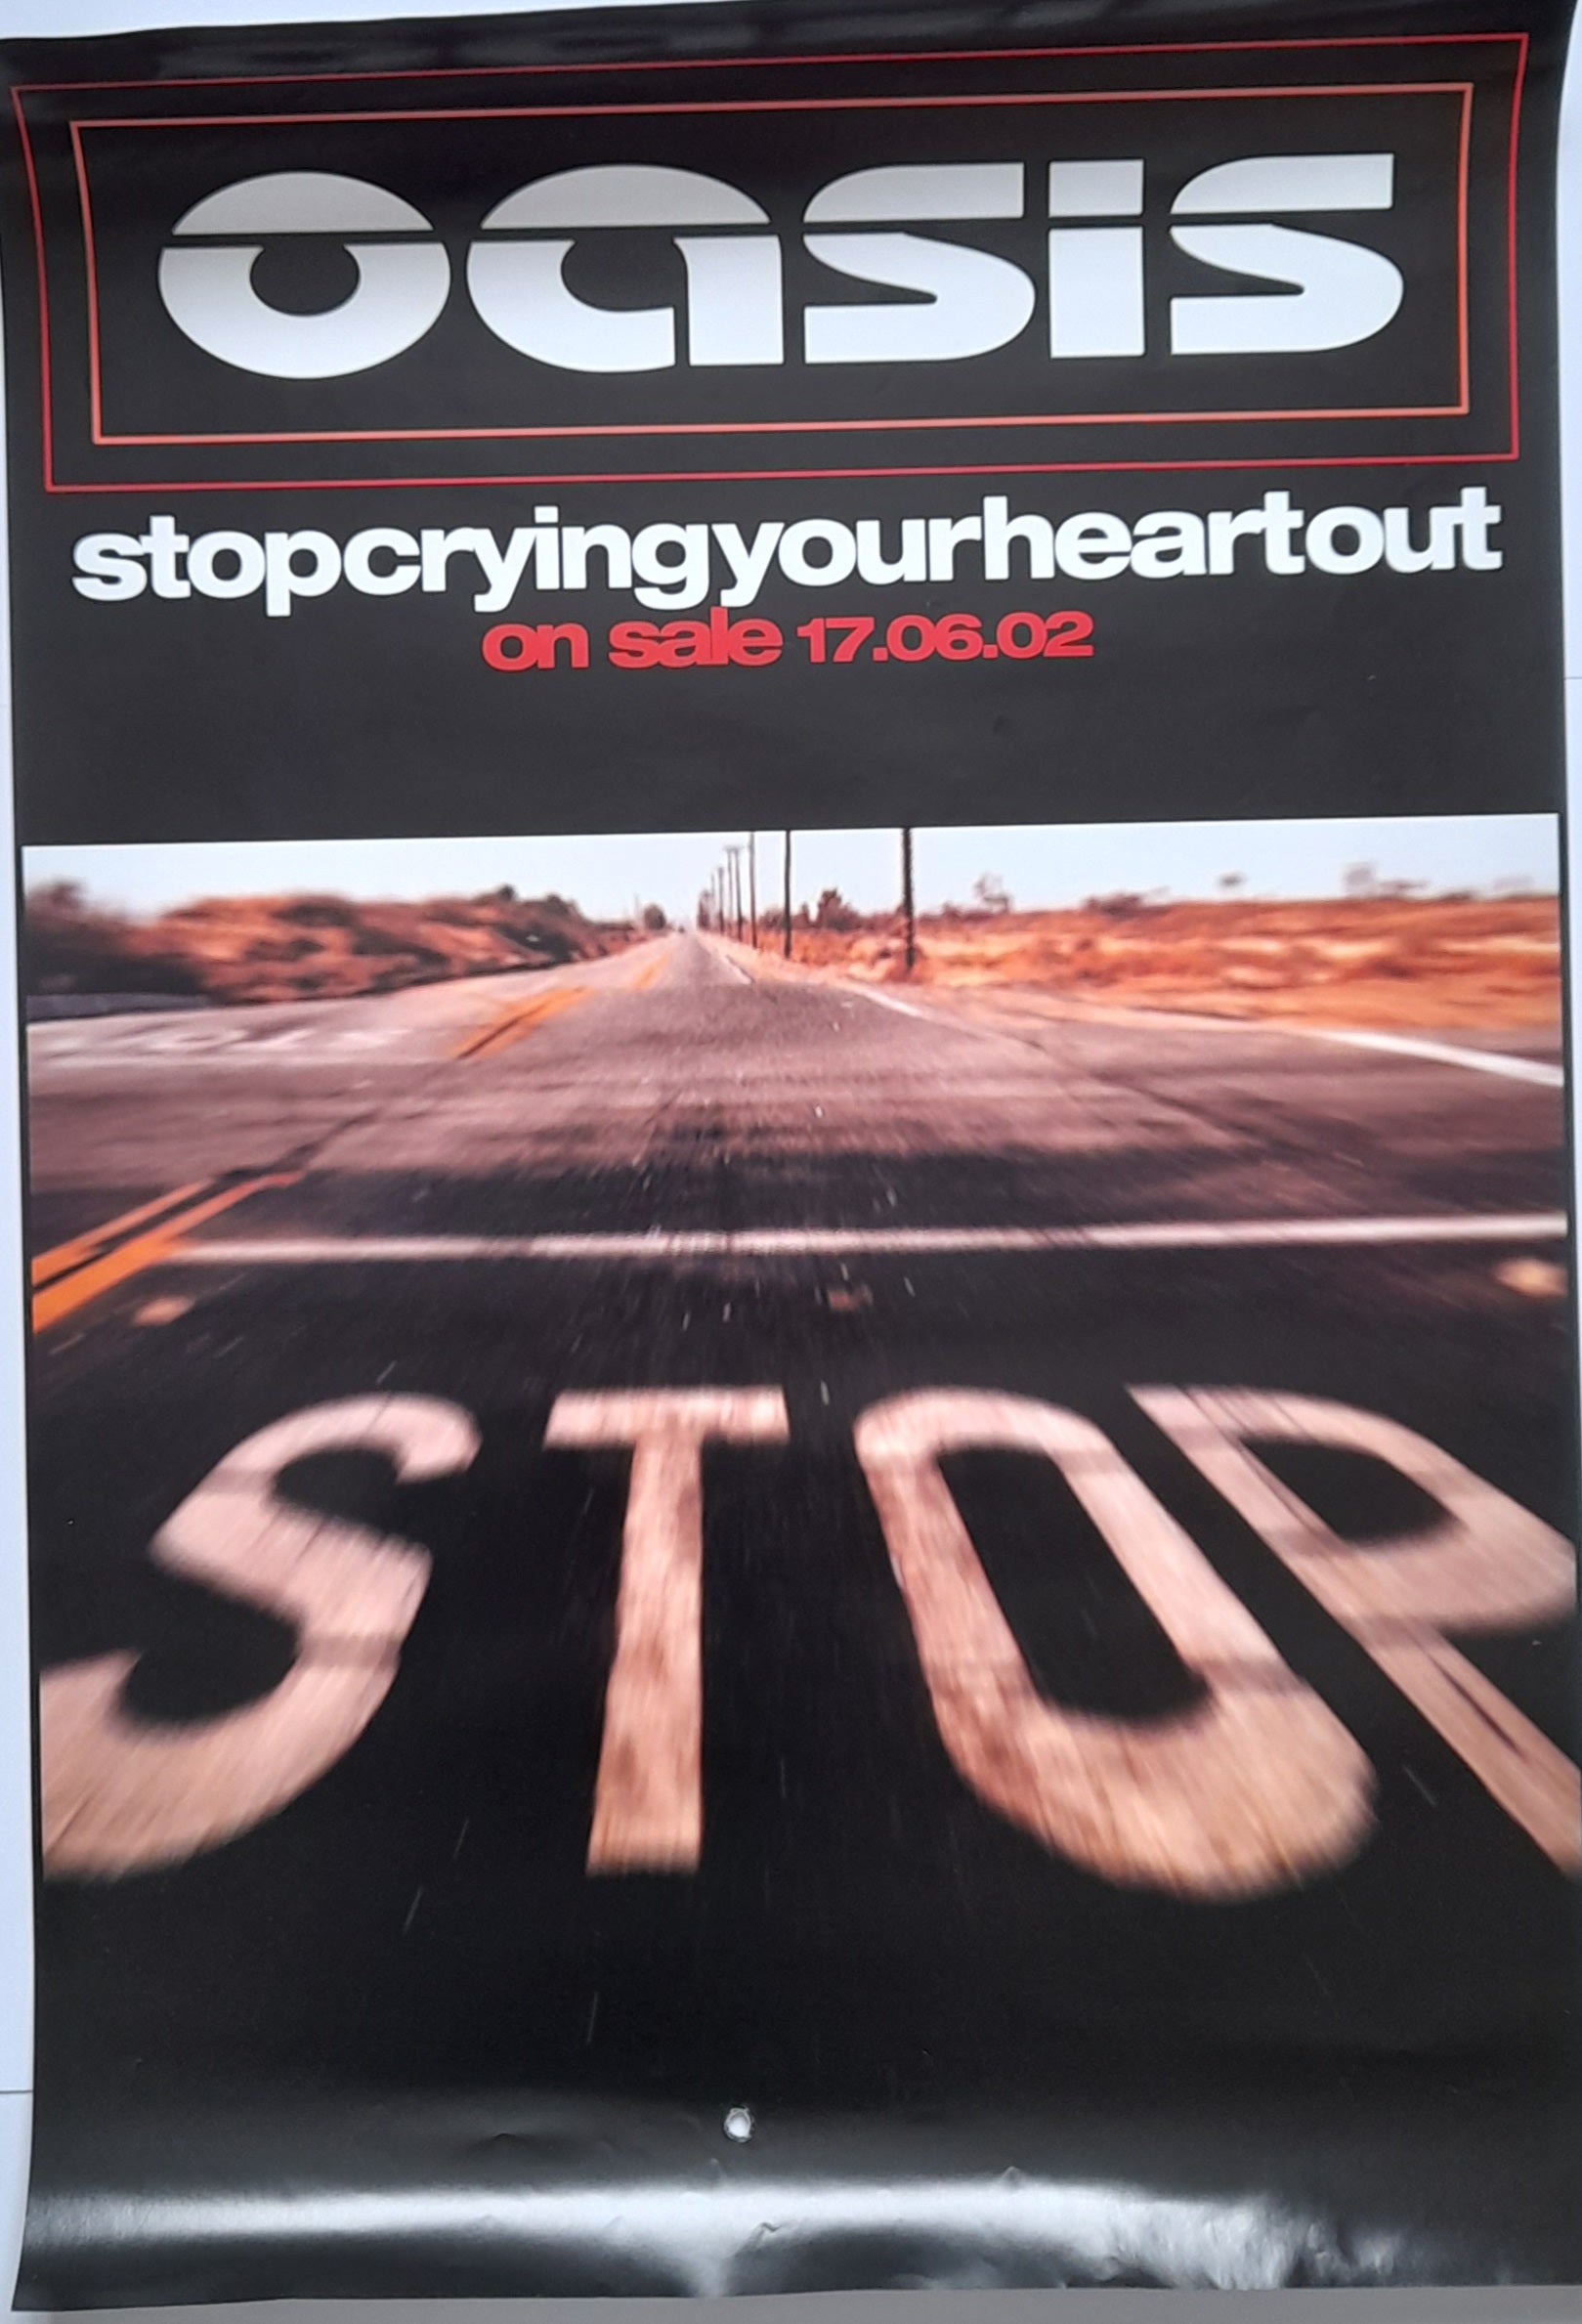 Oasis Stop Crying Your Heart Out Promotional Poster - RewindPressPlay